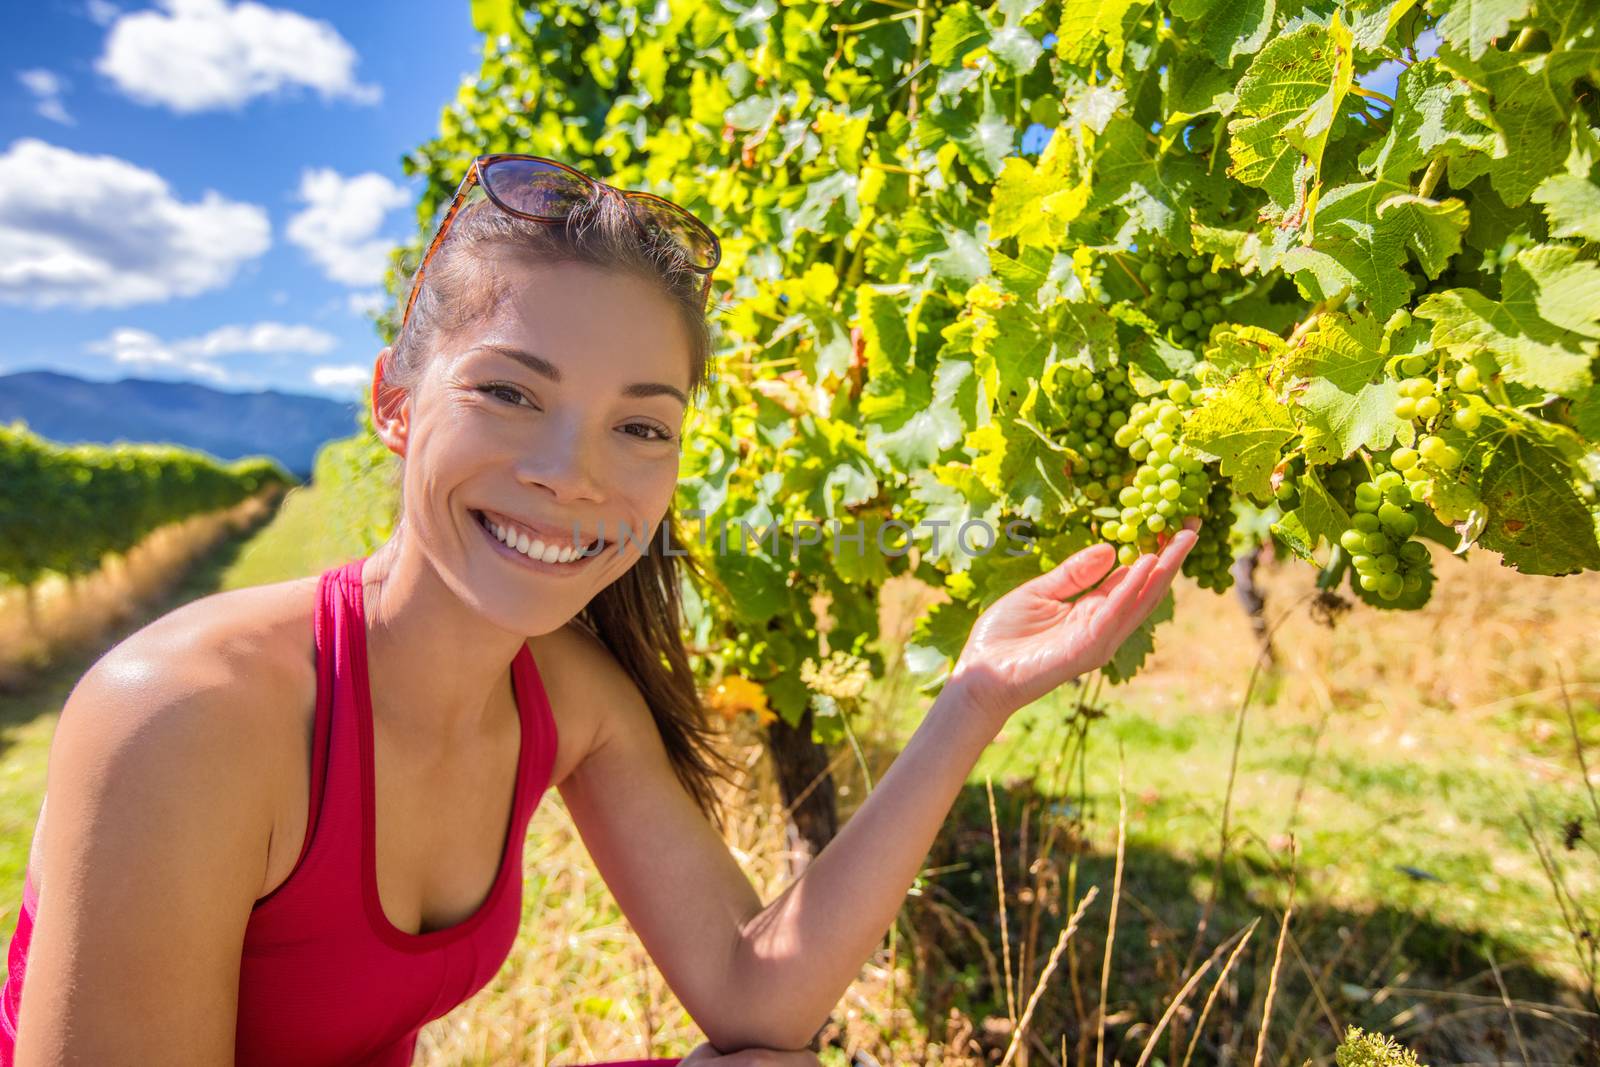 Vineyard winery tourist woman grape picking. Harvest farming to make white wine. Asian girl hand showing holding bunch of green grapes on grapevine. Woman in Marlborough region, New Zealand.